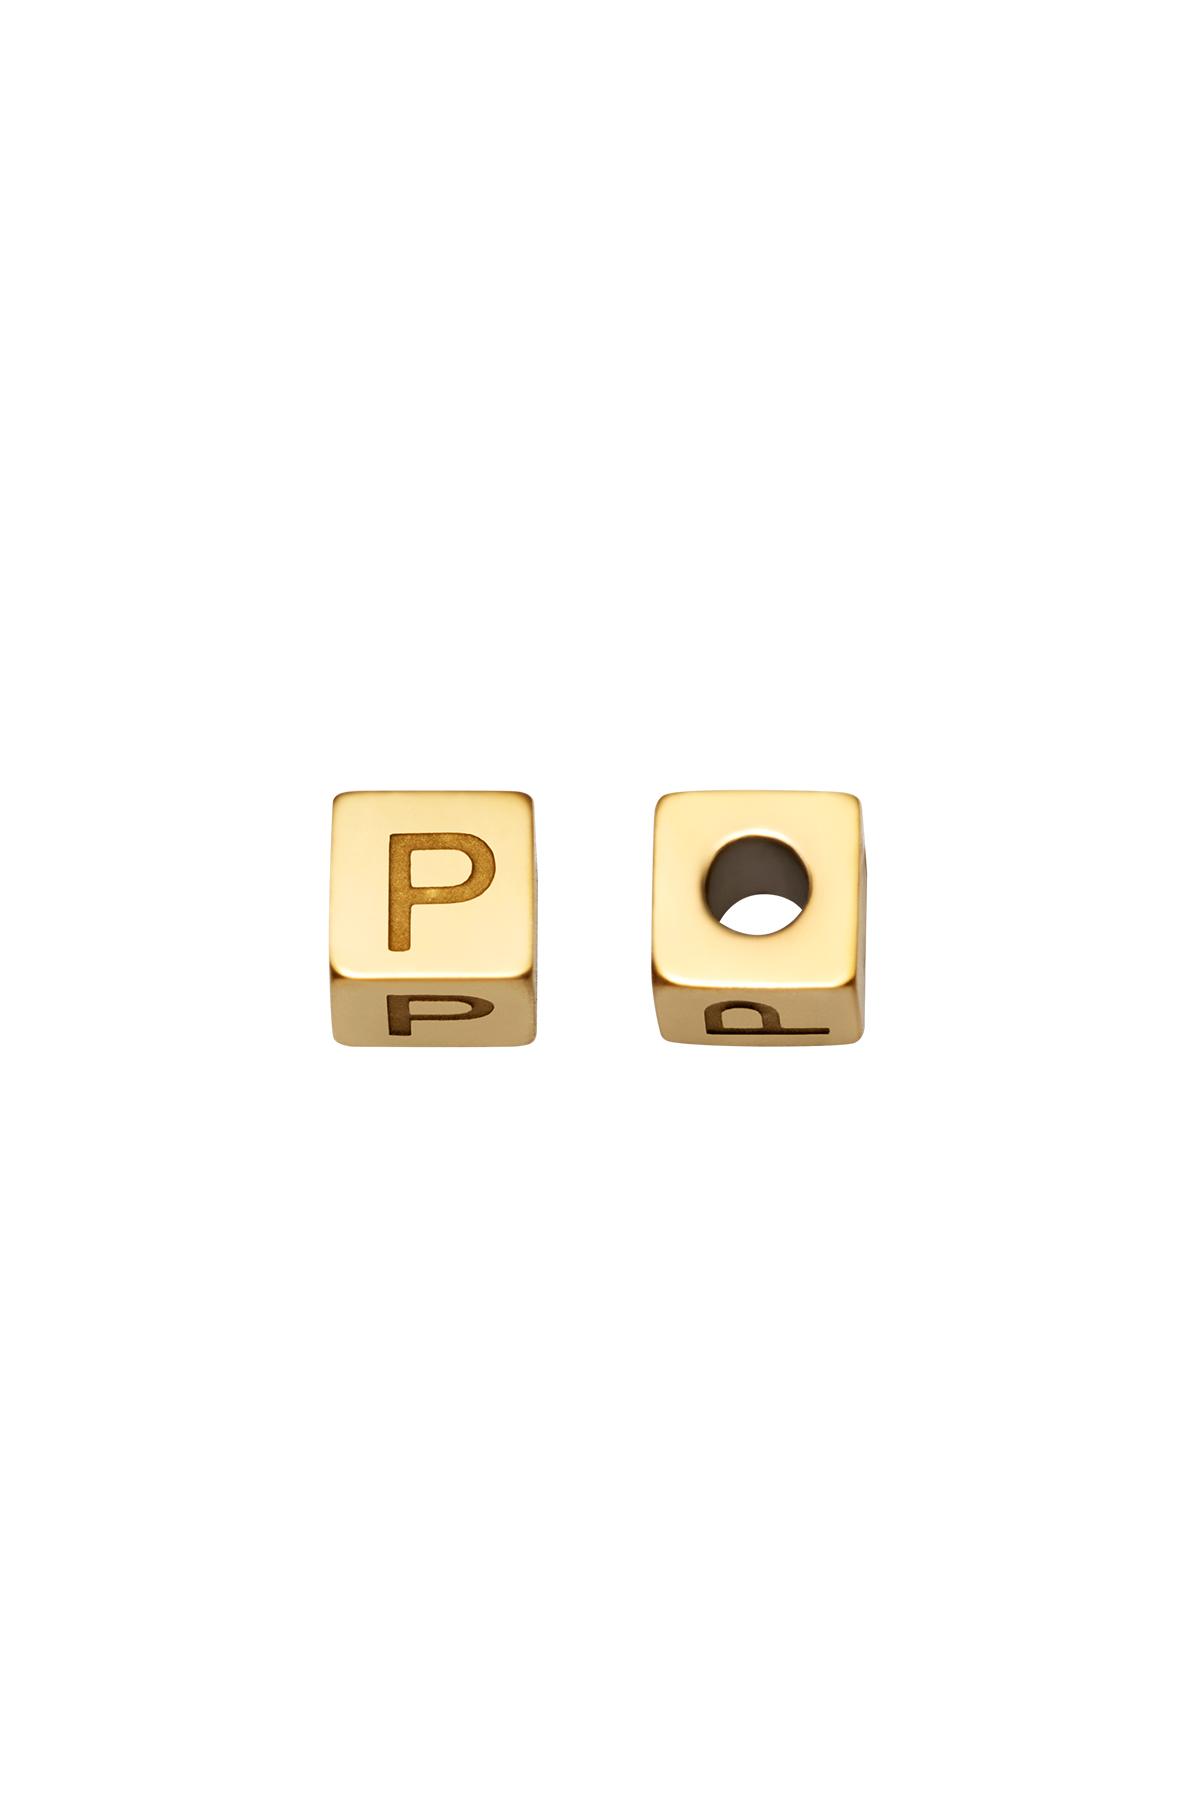 Gold / DIY Beads Alphabet Gold P Stainless Steel Picture26